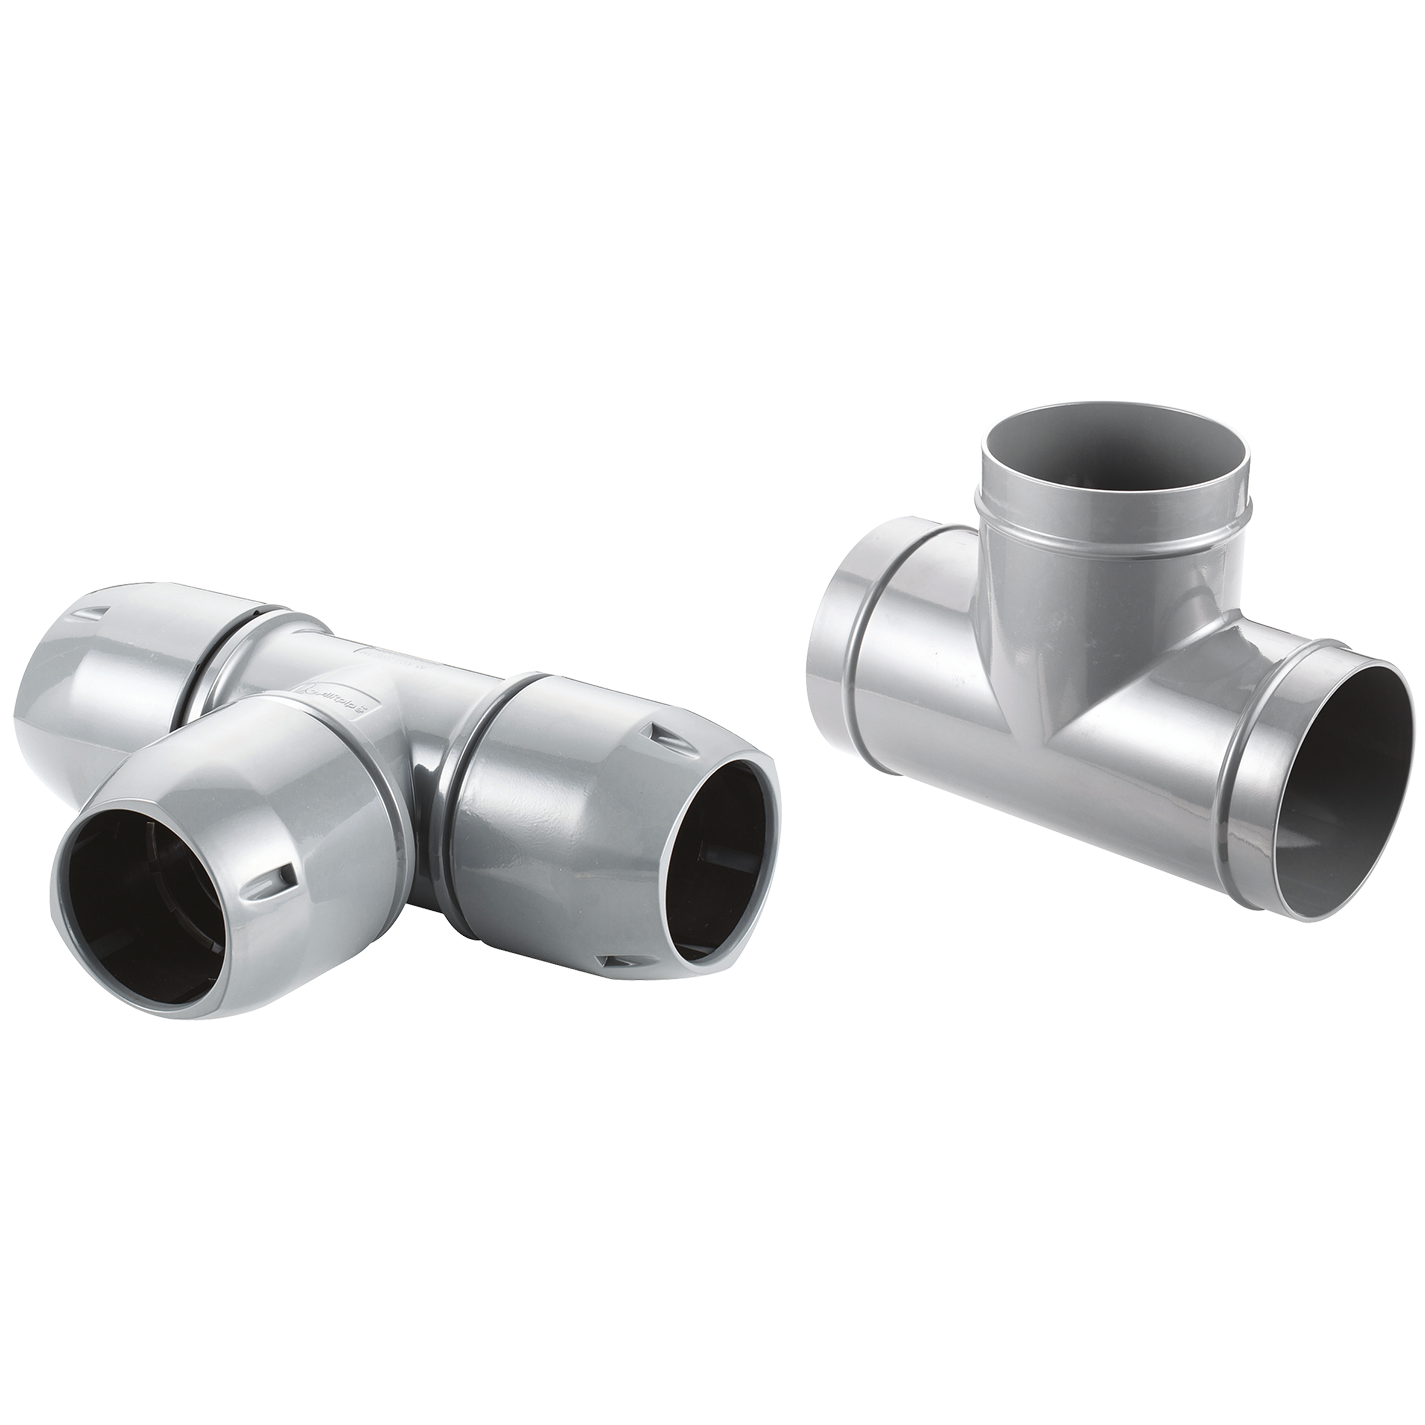 50MM EQUAL TEE AIRPIPE CONNECTOR